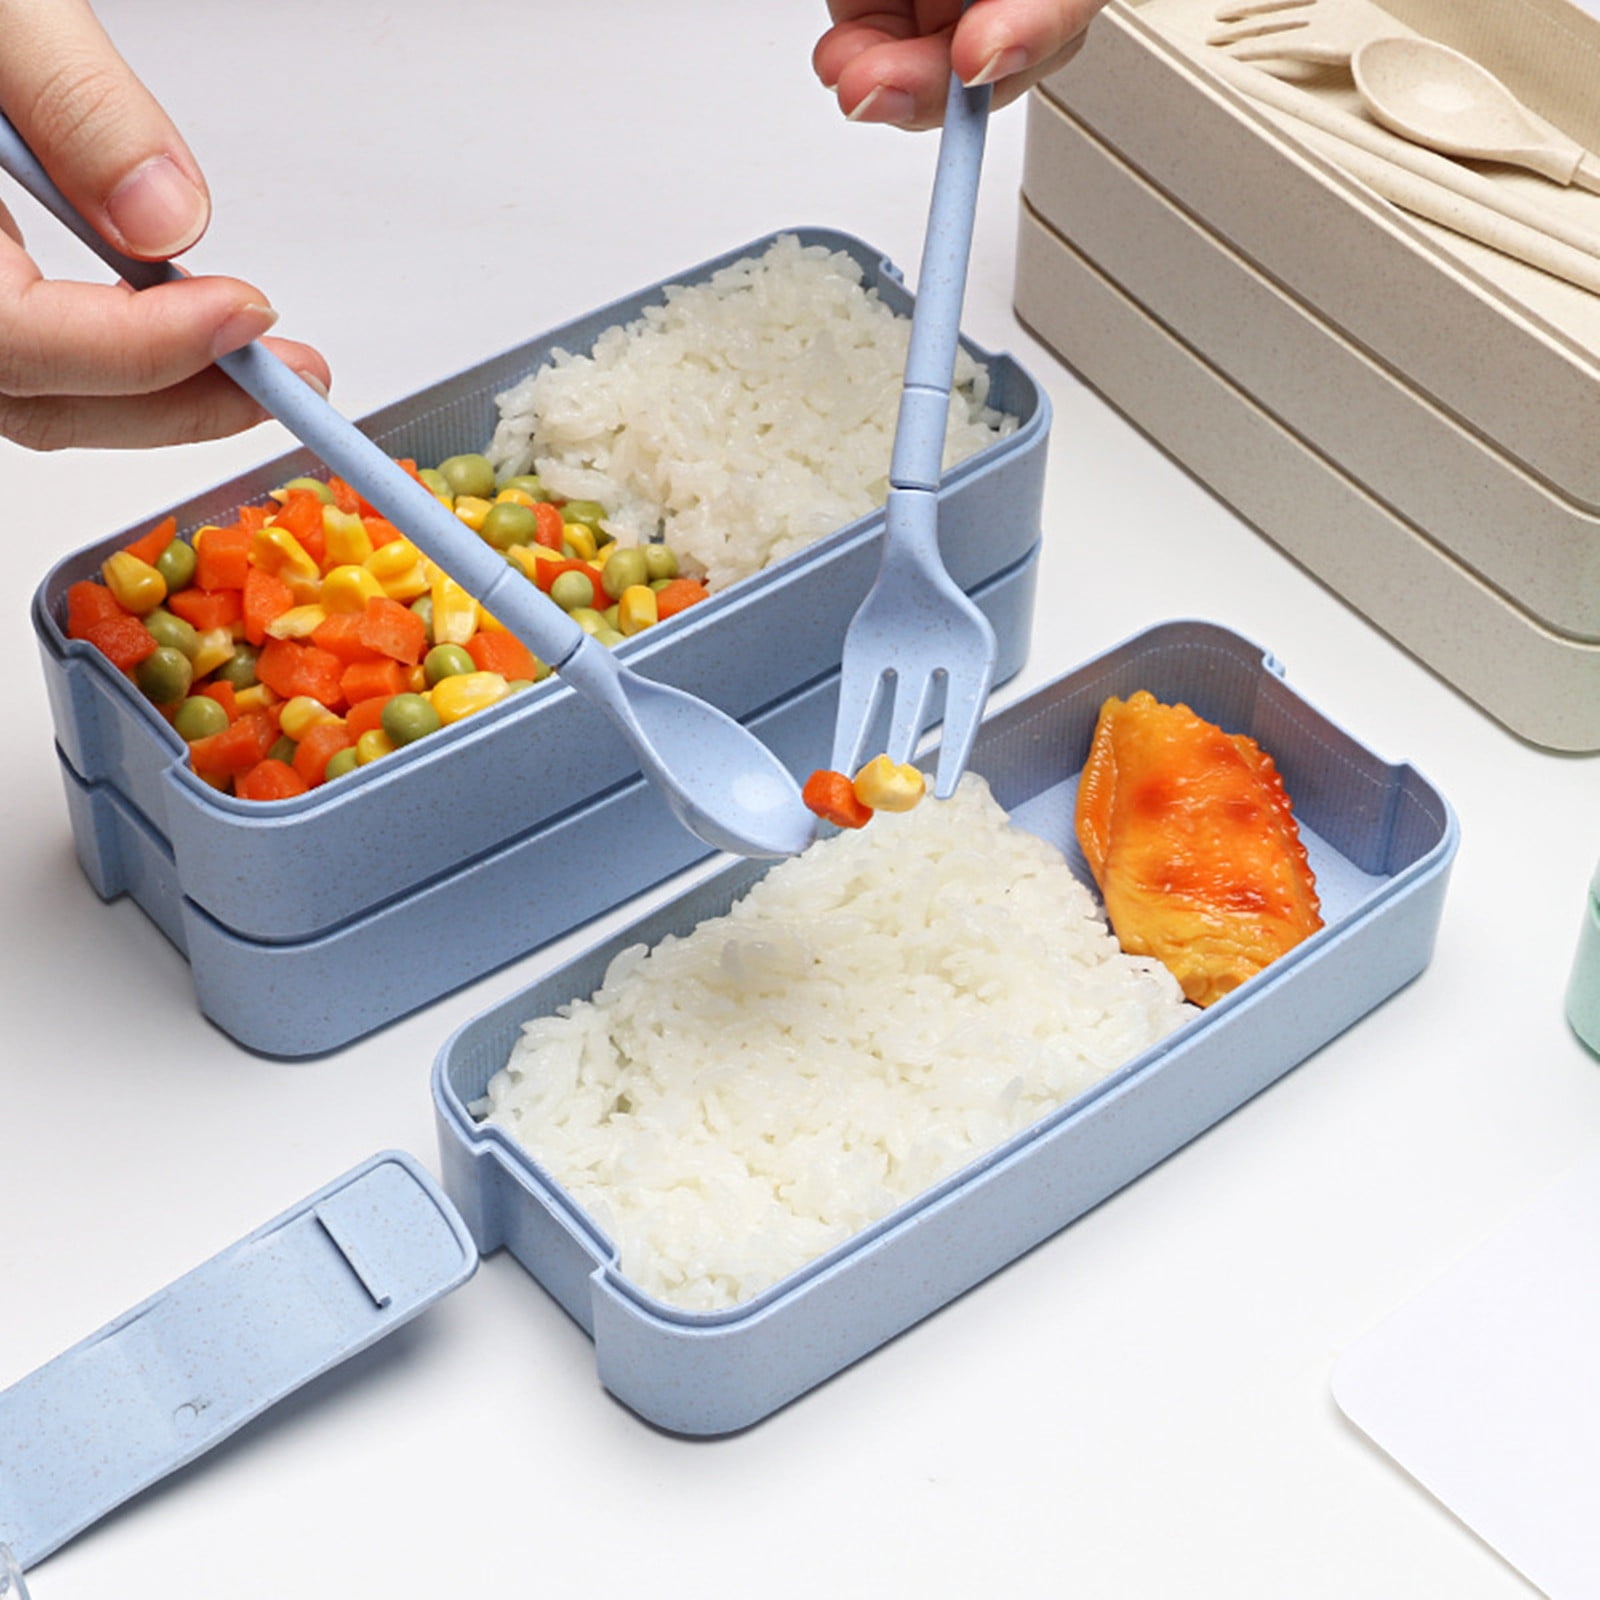 Cteegc Clearance Lunch Box Kids,Bento Box Adult Lunch Box,Lunch Containers for Adults/Kids/Toddler,1600ML-4 Compartment Bento Lunch Box,Built-In